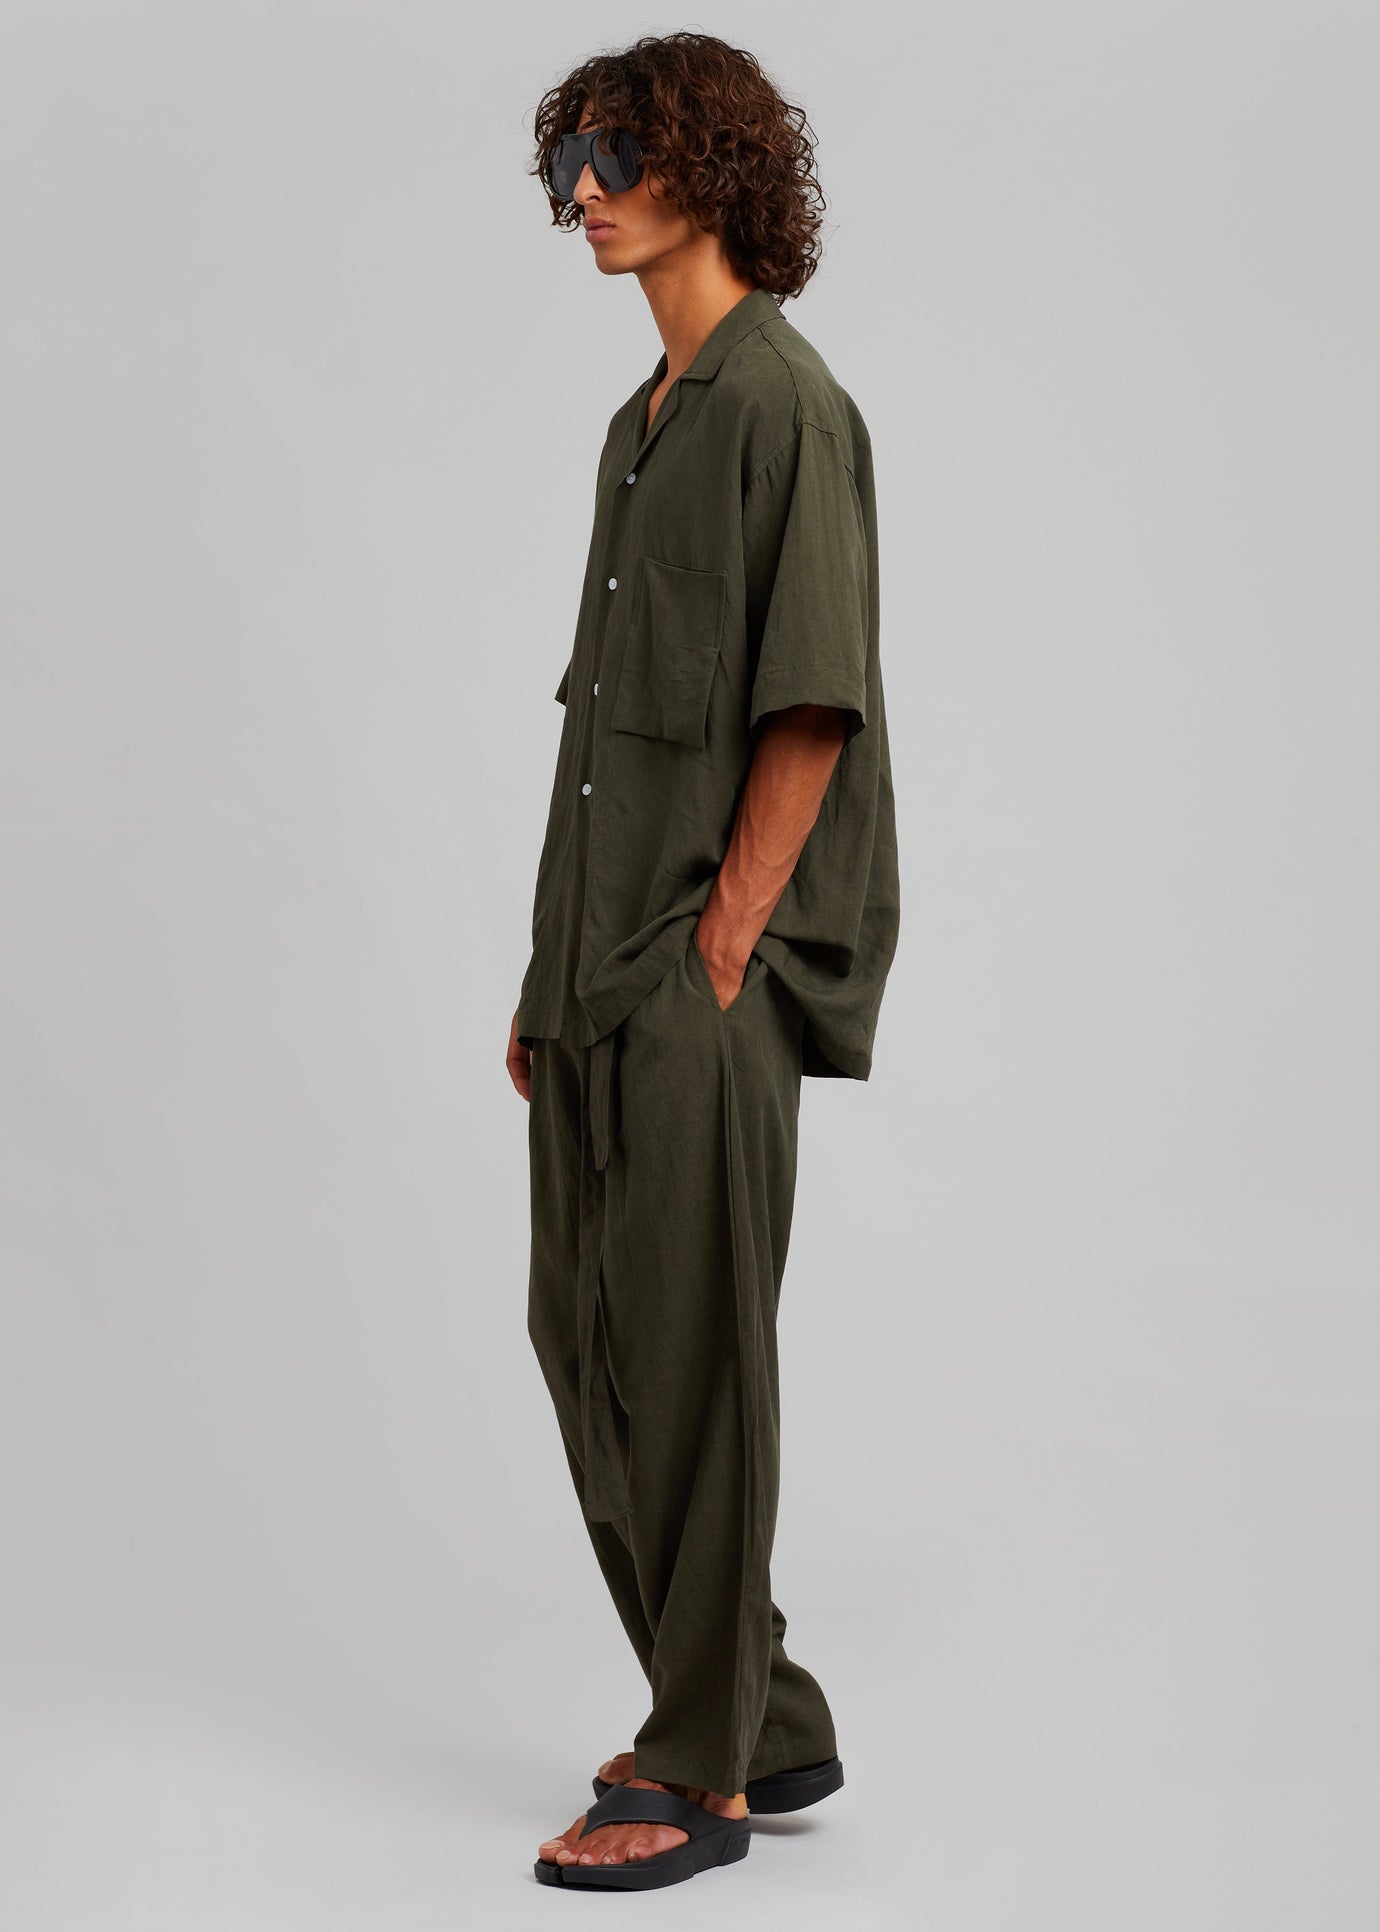 Georg Puch Pants - Olive - 1